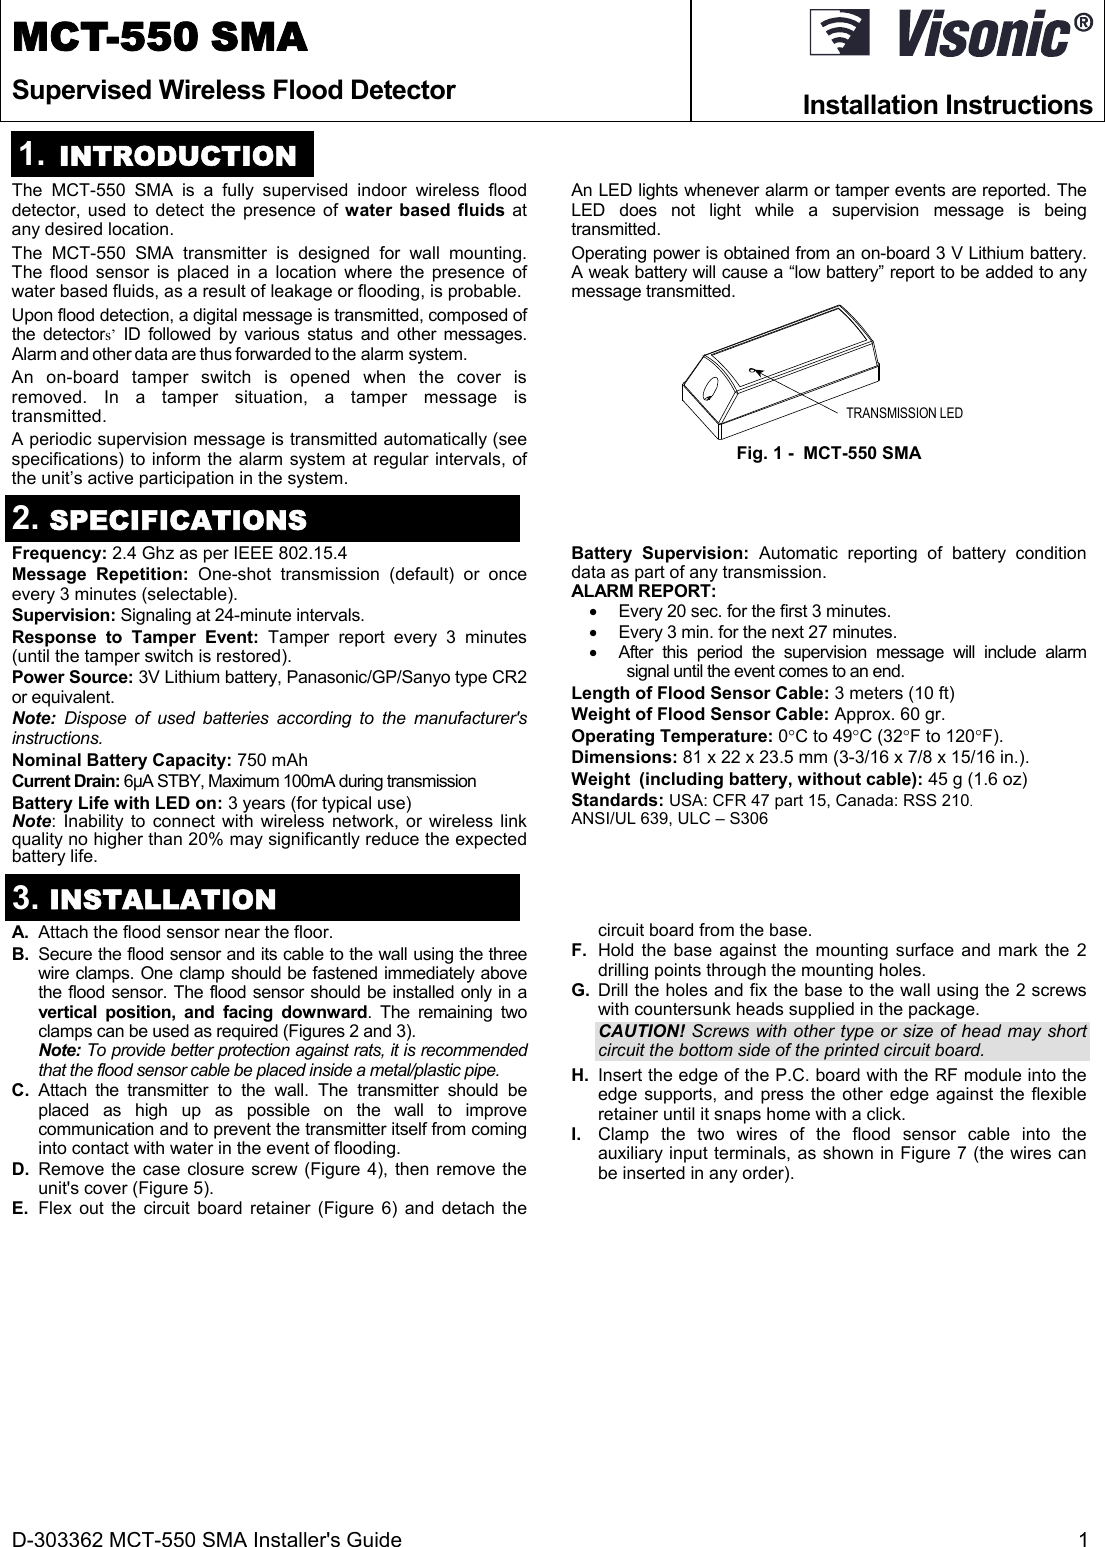 D-303362 MCT-550 SMA Installer&apos;s Guide  1  MCT-550 SMA Supervised Wireless Flood Detector  Installation Instructions 1.  INTRODUCTION The MCT-550 SMA is a fully supervised indoor wireless flood detector, used to detect the presence of water based fluids at any desired location. The MCT-550 SMA transmitter is designed for wall mounting. The flood sensor is placed in a location where the presence of water based fluids, as a result of leakage or flooding, is probable. Upon flood detection, a digital message is transmitted, composed of the detectors’ ID followed by various status and other messages. Alarm and other data are thus forwarded to the alarm system. An on-board tamper switch is opened when the cover is removed. In a tamper situation, a tamper message is transmitted. A periodic supervision message is transmitted automatically (see specifications) to inform the alarm system at regular intervals, of the unit’s active participation in the system. An LED lights whenever alarm or tamper events are reported. The LED does not light while a supervision message is being transmitted. Operating power is obtained from an on-board 3 V Lithium battery. A weak battery will cause a “low battery” report to be added to any message transmitted. TRANSMISSION LED Fig. 1 -  MCT-550 SMA 2. SPECIFICATIONS Frequency: 2.4 Ghz as per IEEE 802.15.4 Message Repetition: One-shot transmission (default) or once every 3 minutes (selectable). Supervision: Signaling at 24-minute intervals. Response to Tamper Event: Tamper report every 3 minutes (until the tamper switch is restored). Power Source: 3V Lithium battery, Panasonic/GP/Sanyo type CR2 or equivalent. Note: Dispose of used batteries according to the manufacturer&apos;s instructions. Nominal Battery Capacity: 750 mAh Current Drain: 6µA STBY, Maximum 100mA during transmission Battery Life with LED on: 3 years (for typical use) Note: Inability to connect with wireless network, or wireless link quality no higher than 20% may significantly reduce the expected battery life. Battery Supervision: Automatic reporting of battery condition data as part of any transmission. ALARM REPORT:   Every 20 sec. for the first 3 minutes.   Every 3 min. for the next 27 minutes.   After this period the supervision message will include alarm signal until the event comes to an end. Length of Flood Sensor Cable: 3 meters (10 ft) Weight of Flood Sensor Cable: Approx. 60 gr. Operating Temperature: 0C to 49C (32F to 120F). Dimensions: 81 x 22 x 23.5 mm (3-3/16 x 7/8 x 15/16 in.). Weight  (including battery, without cable): 45 g (1.6 oz)  Standards: USA: CFR 47 part 15, Canada: RSS 210. ANSI/UL 639, ULC – S306   3. INSTALLATION A.  Attach the flood sensor near the floor. B.  Secure the flood sensor and its cable to the wall using the three wire clamps. One clamp should be fastened immediately above the flood sensor. The flood sensor should be installed only in a vertical position, and facing downward. The remaining two clamps can be used as required (Figures 2 and 3). Note: To provide better protection against rats, it is recommended that the flood sensor cable be placed inside a metal/plastic pipe.  C. Attach the transmitter to the wall. The transmitter should be placed as high up as possible on the wall to improve communication and to prevent the transmitter itself from coming into contact with water in the event of flooding. D. Remove the case closure screw (Figure 4), then remove the unit&apos;s cover (Figure 5). E. Flex out the circuit board retainer (Figure 6) and detach the circuit board from the base. F.  Hold the base against the mounting surface and mark the 2 drilling points through the mounting holes. G. Drill the holes and fix the base to the wall using the 2 screws with countersunk heads supplied in the package. CAUTION! Screws with other type or size of head may short circuit the bottom side of the printed circuit board. H.  Insert the edge of the P.C. board with the RF module into the edge supports, and press the other edge against the flexible retainer until it snaps home with a click. I.  Clamp the two wires of the flood sensor cable into the auxiliary input terminals, as shown in Figure 7 (the wires can be inserted in any order). 